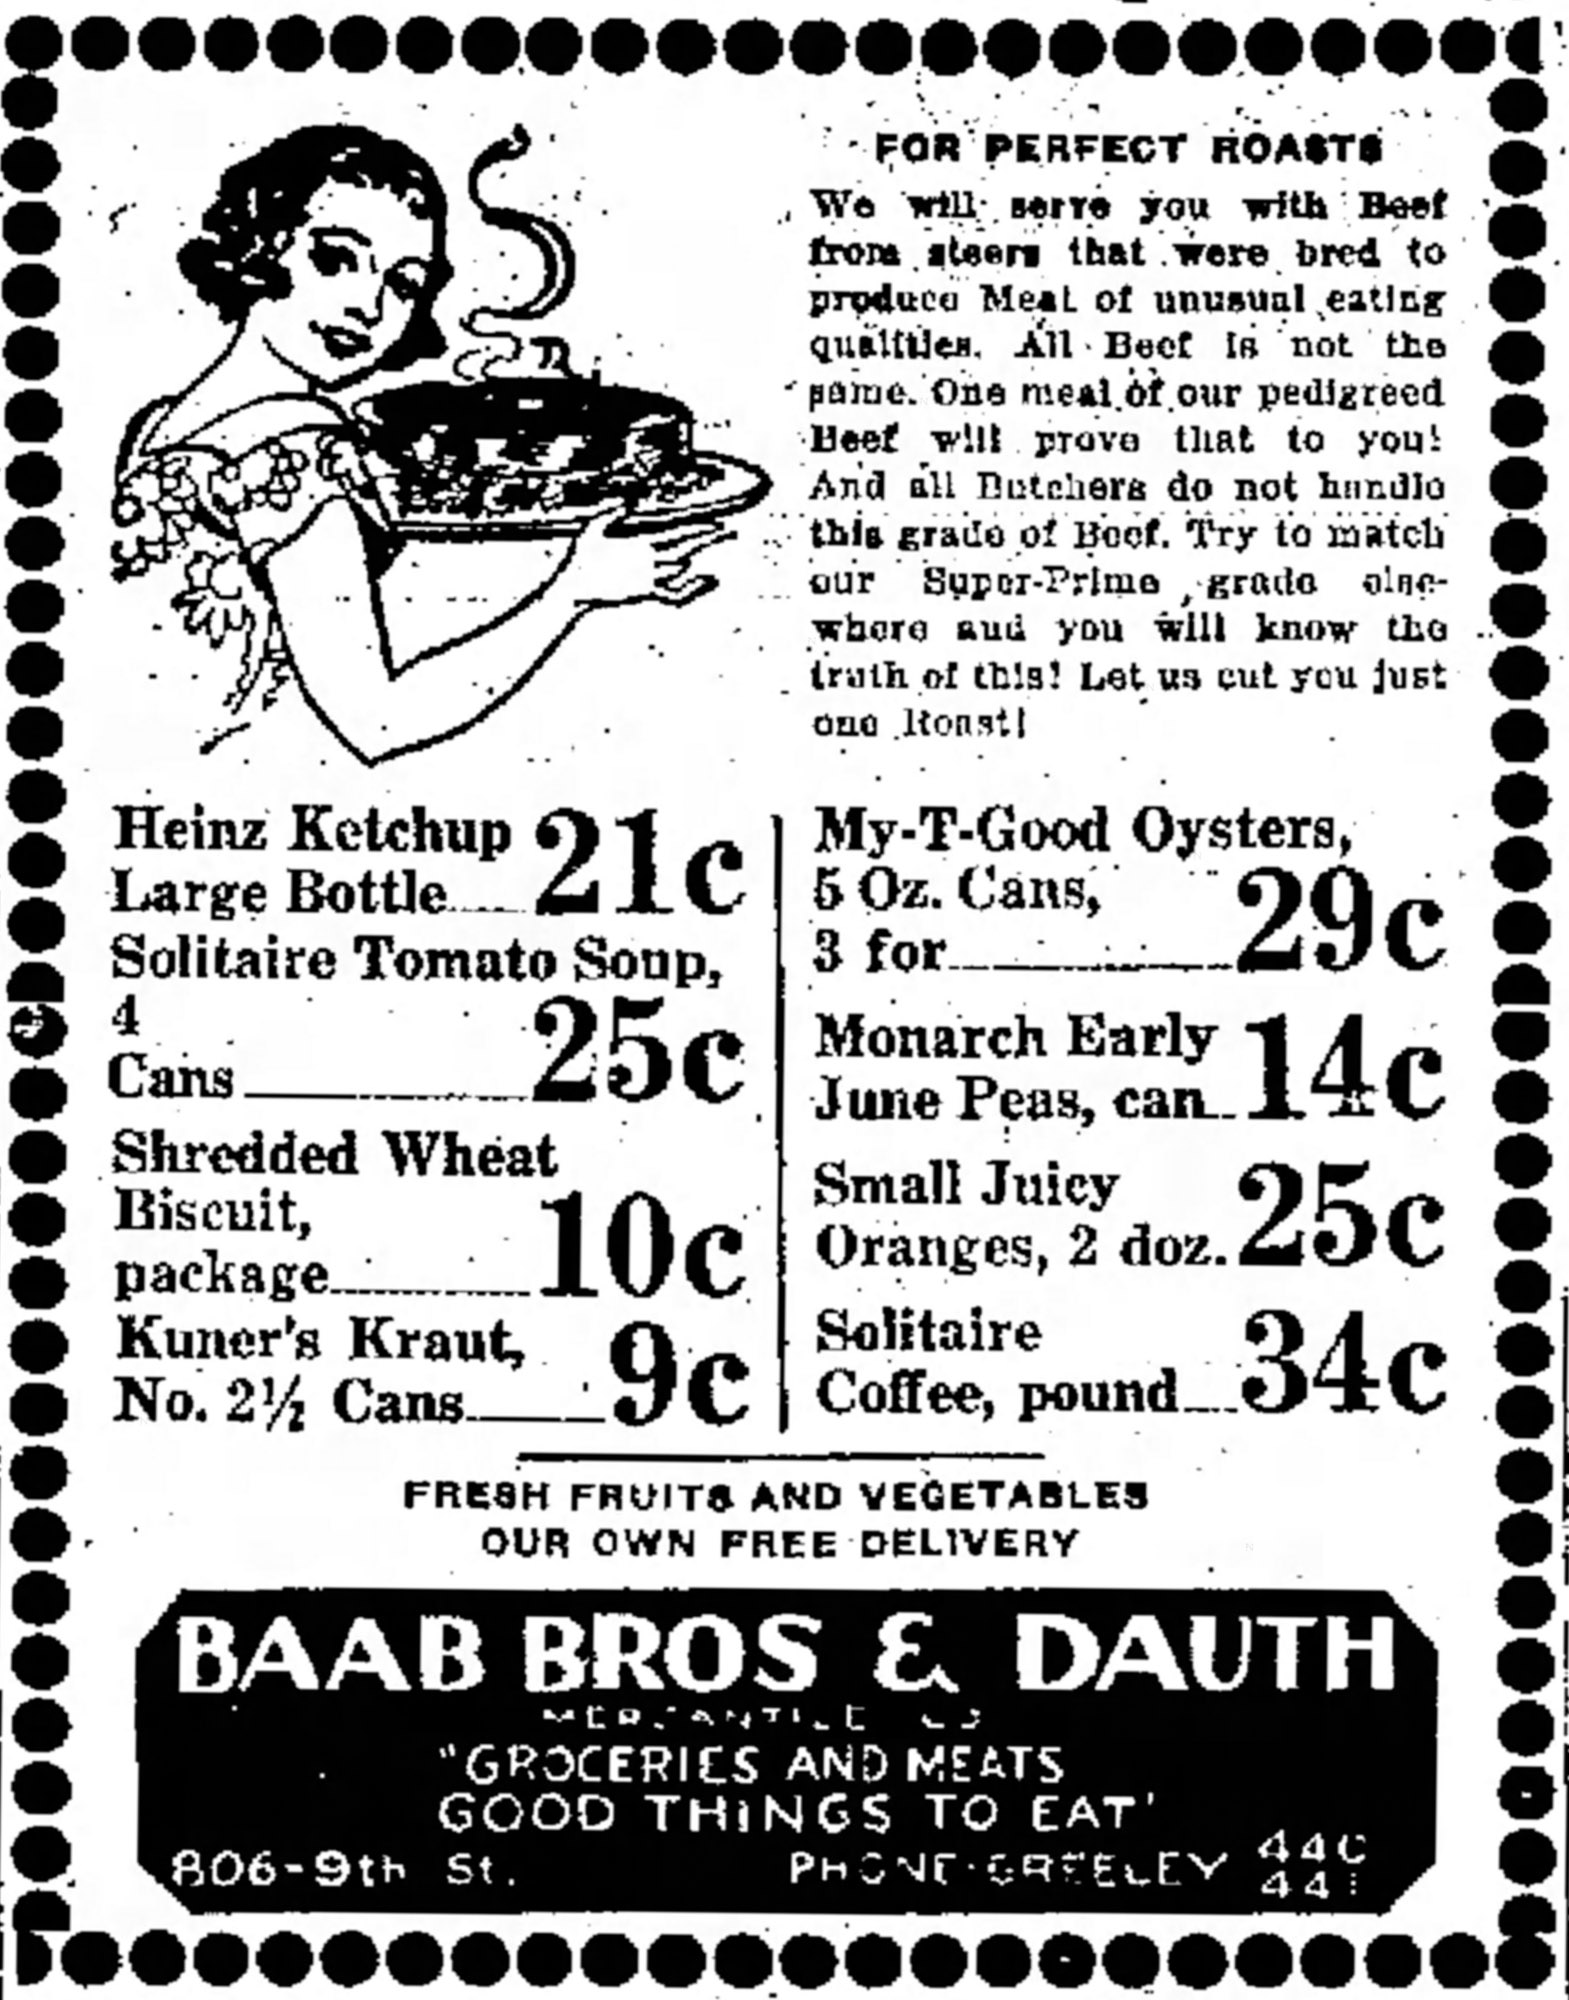 Dauth Family Archive - 1933-01-13 - Greeley Daily Tribune - Baab Bros and Dauth Advertisement